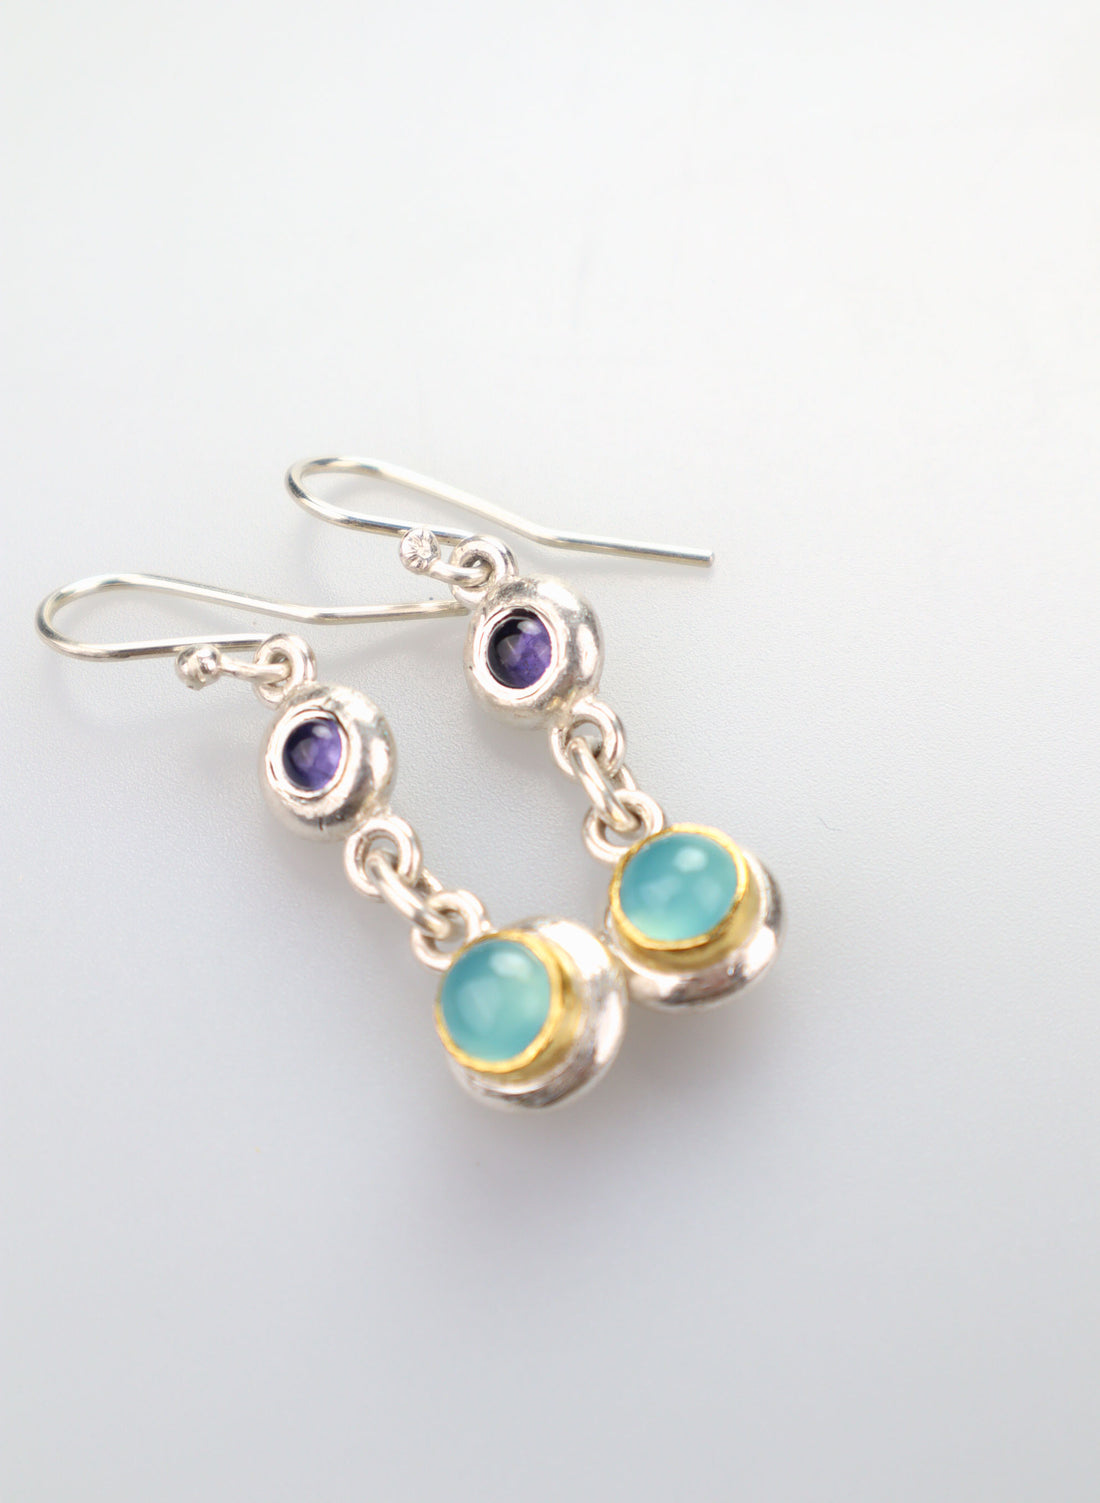 Double Ingot Drop Earrings - Iolite Sterling Silver and 22ct Gold